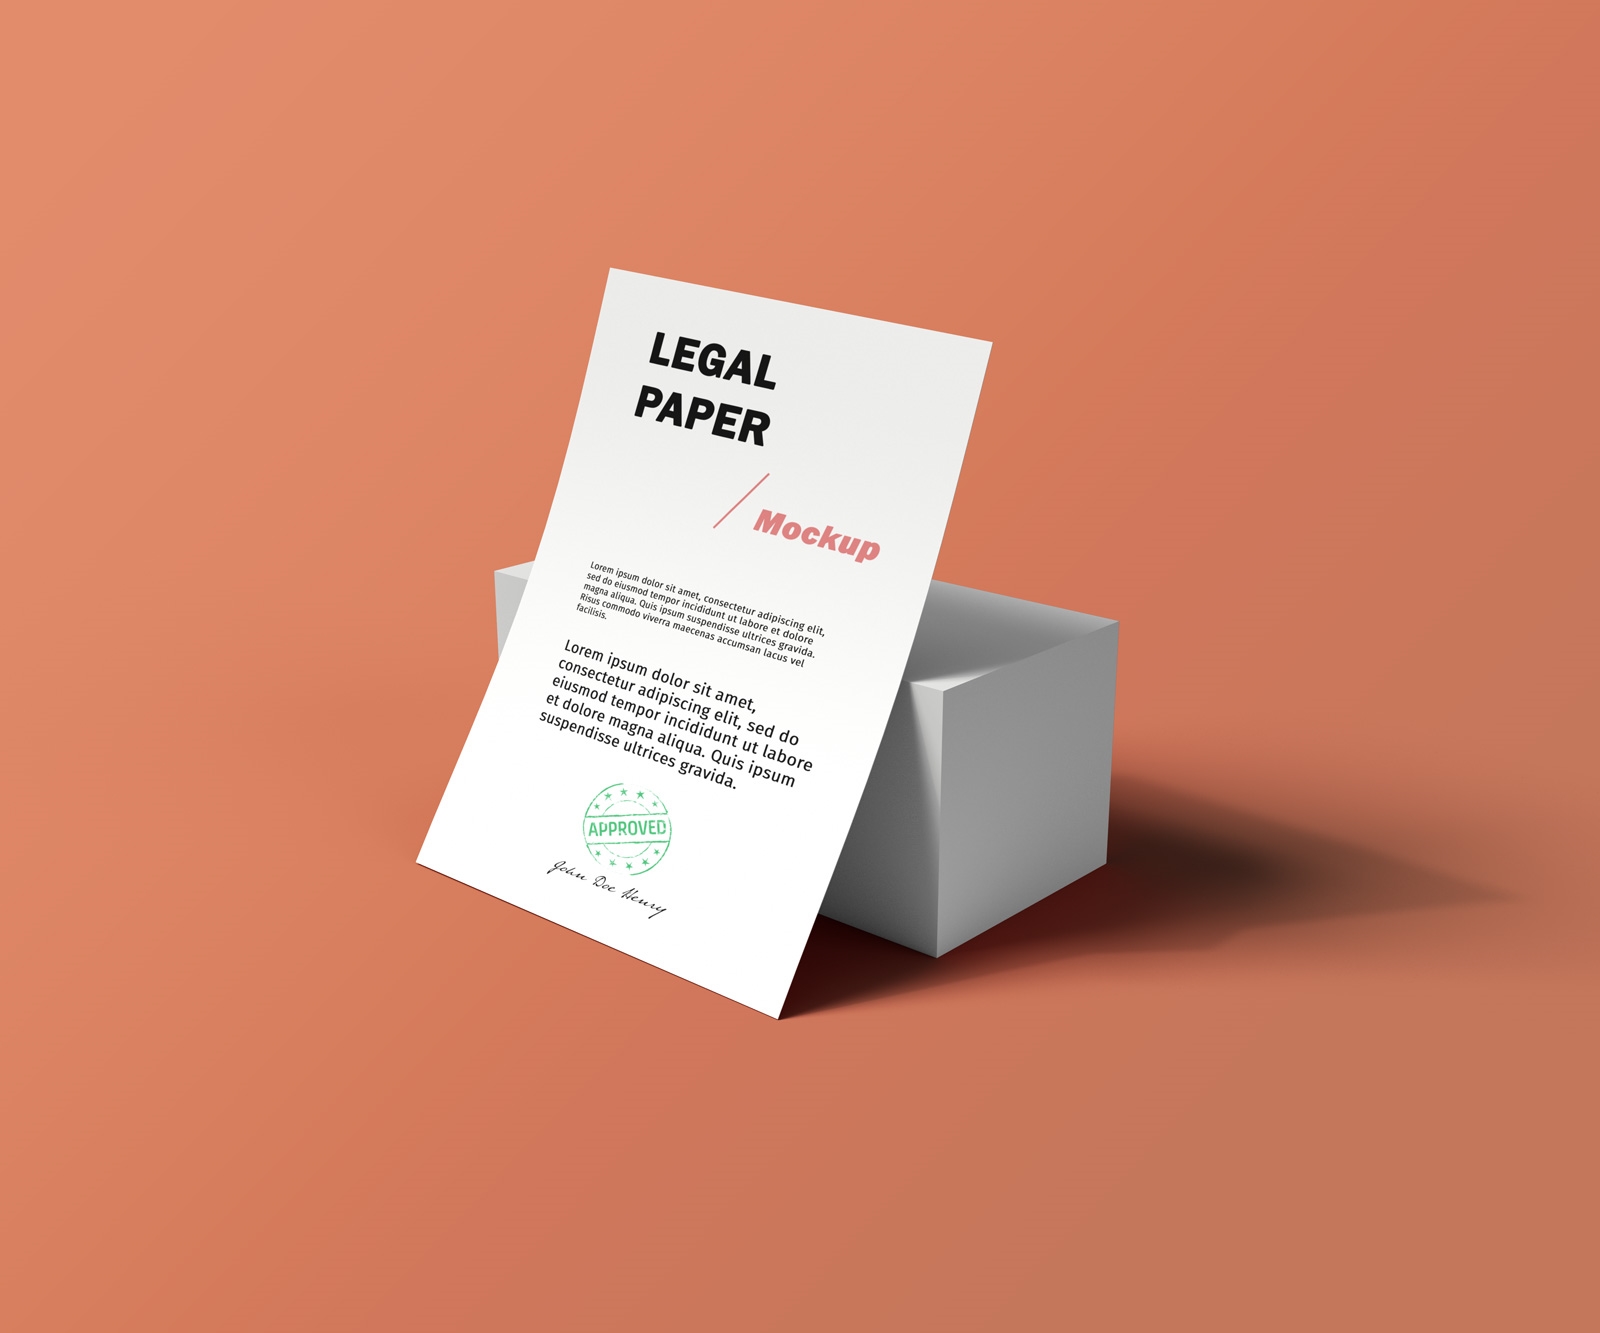 Front View of a Legal A4 Paper Mockup FREE PSD